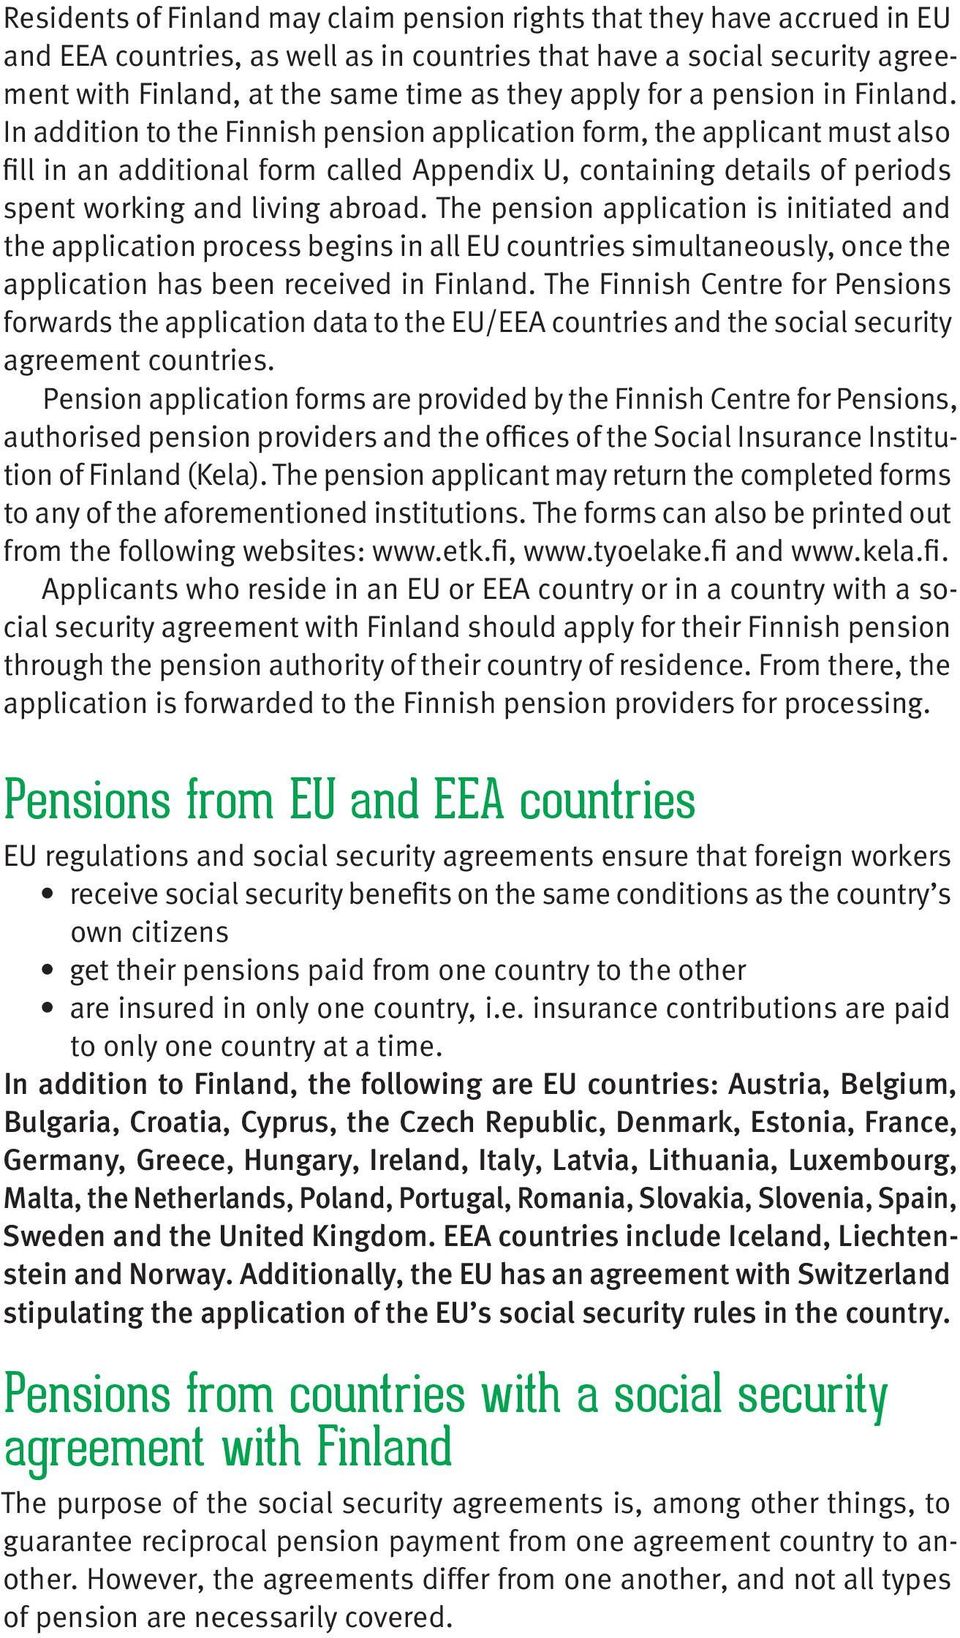 In addition to the Finnish pension application form, the applicant must also fill in an additional form called Appendix U, containing details of periods spent working and living abroad.